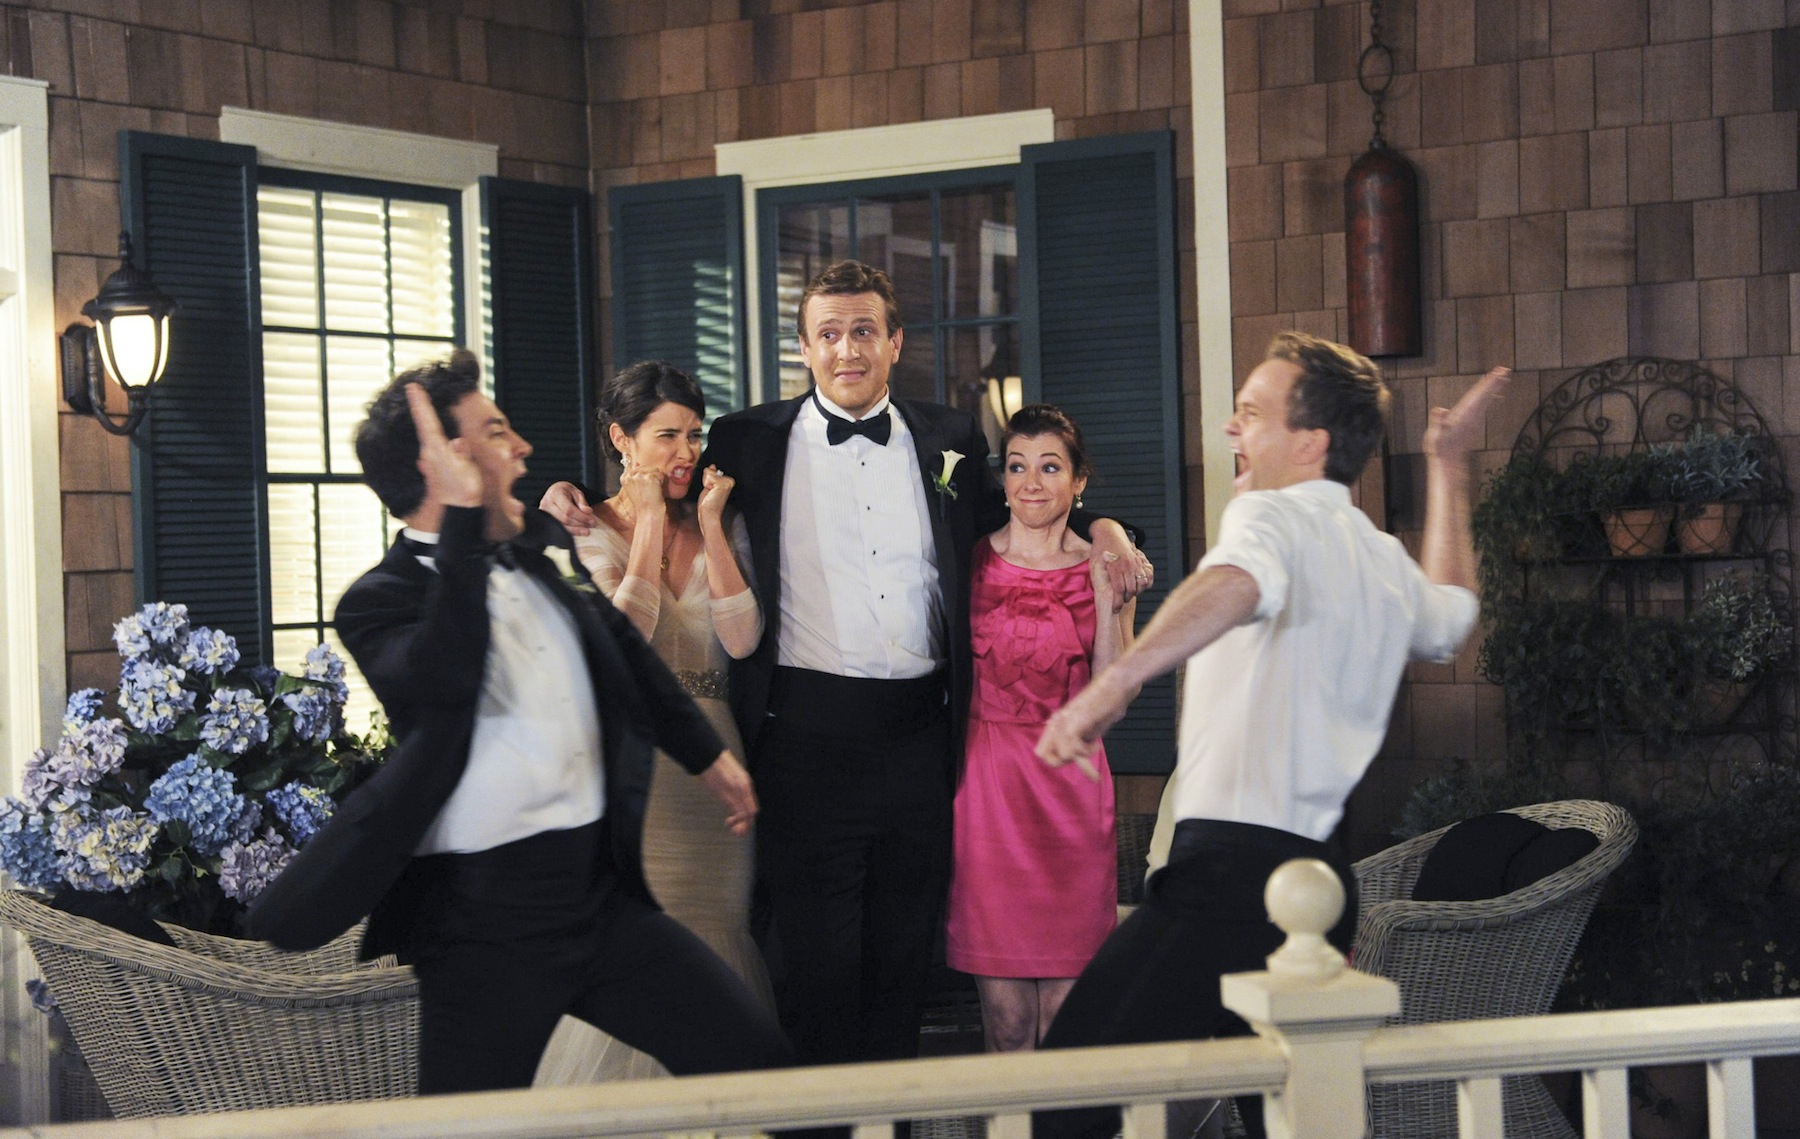 Josh Radnor as Ted, Cobie Smulders as Robin, Jason Segel as Marshall, Alyson Hannigan as Lily, and Neil Patrick Harris as Barney (Ron P. Jaffe / Fox Television / CBS)